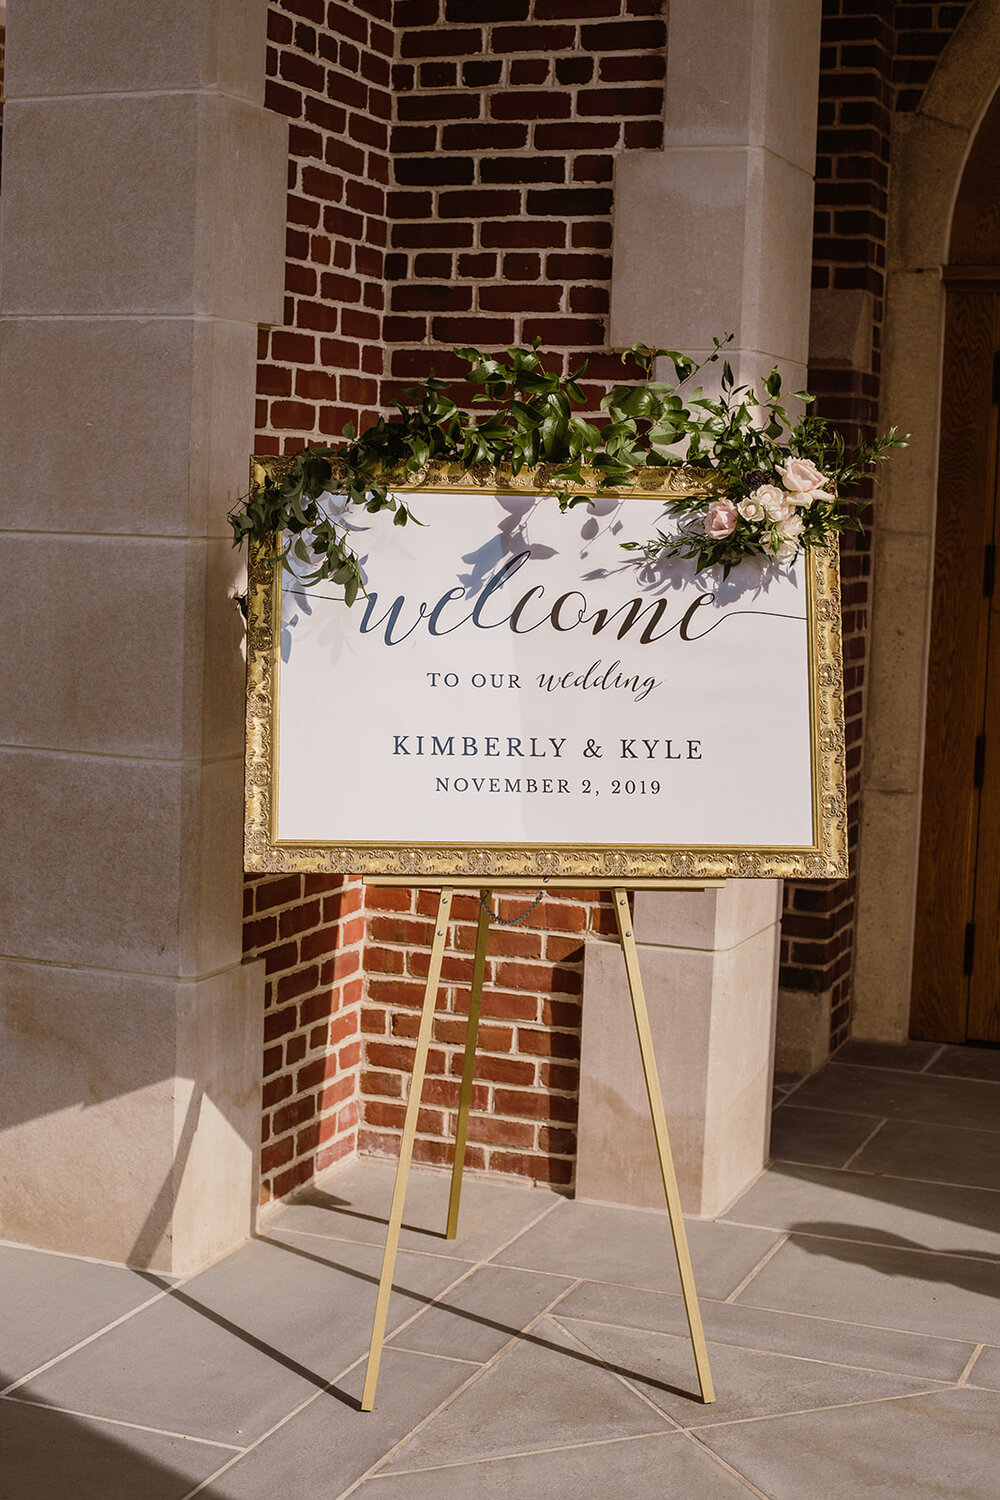 Wedding Welcome Sign | Romantic wedding at St. Bridget Catholic Church, Richmond, VA | Black tie wedding with a red tux and custom Anne Barge gown